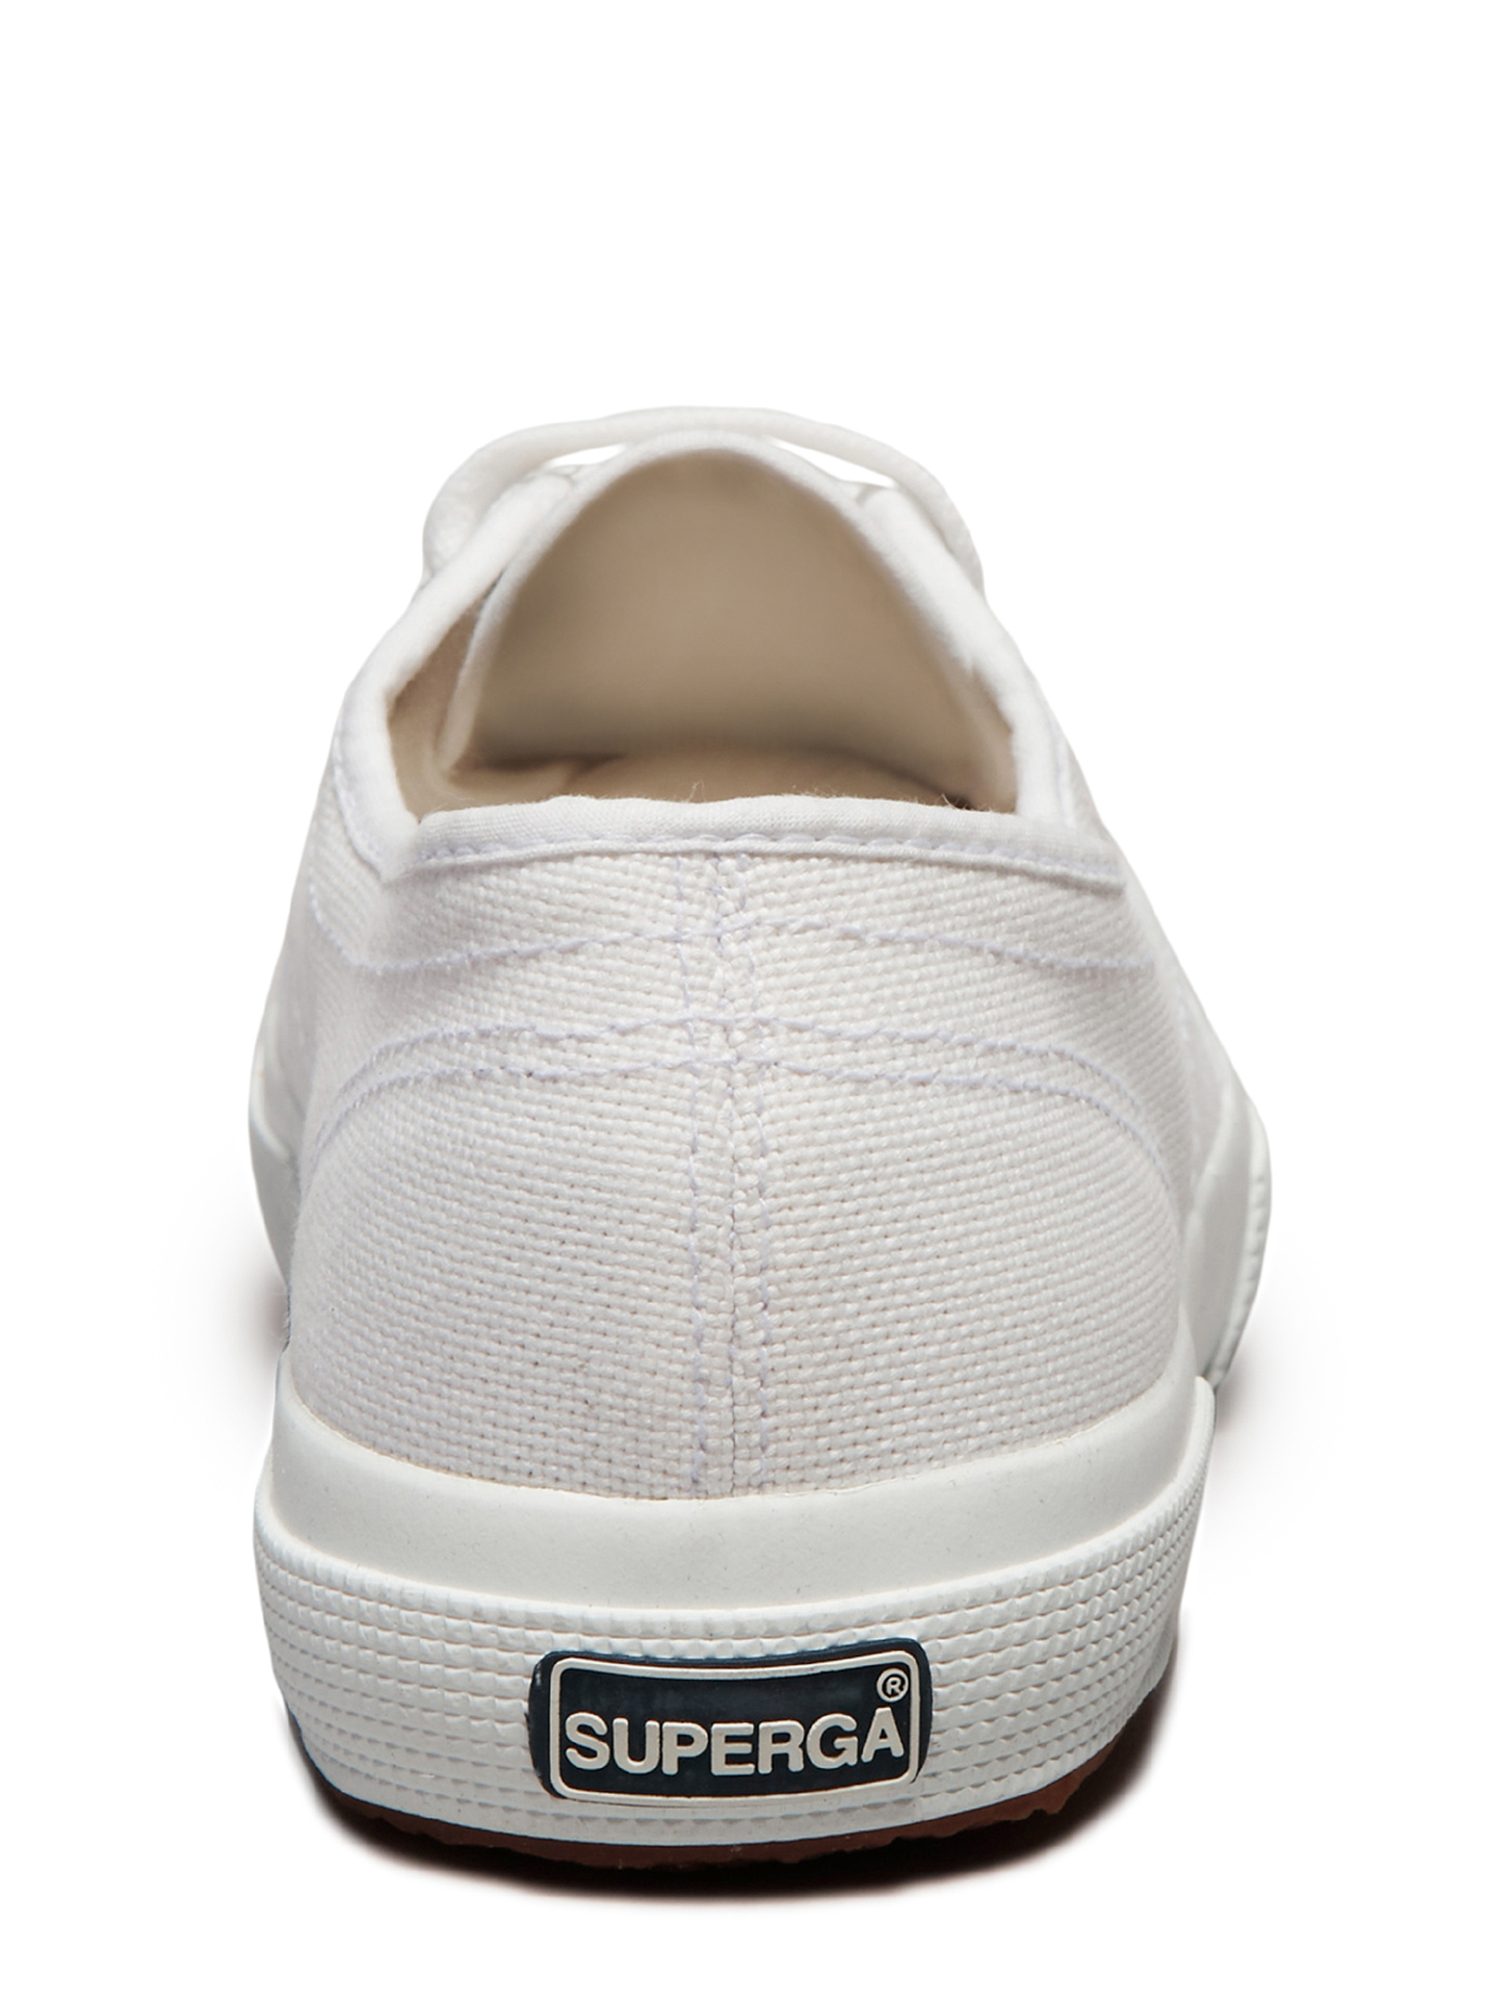 Superga 2750 Cotu Classic Lace-up Canvas Sneaker (Women's) - image 5 of 10